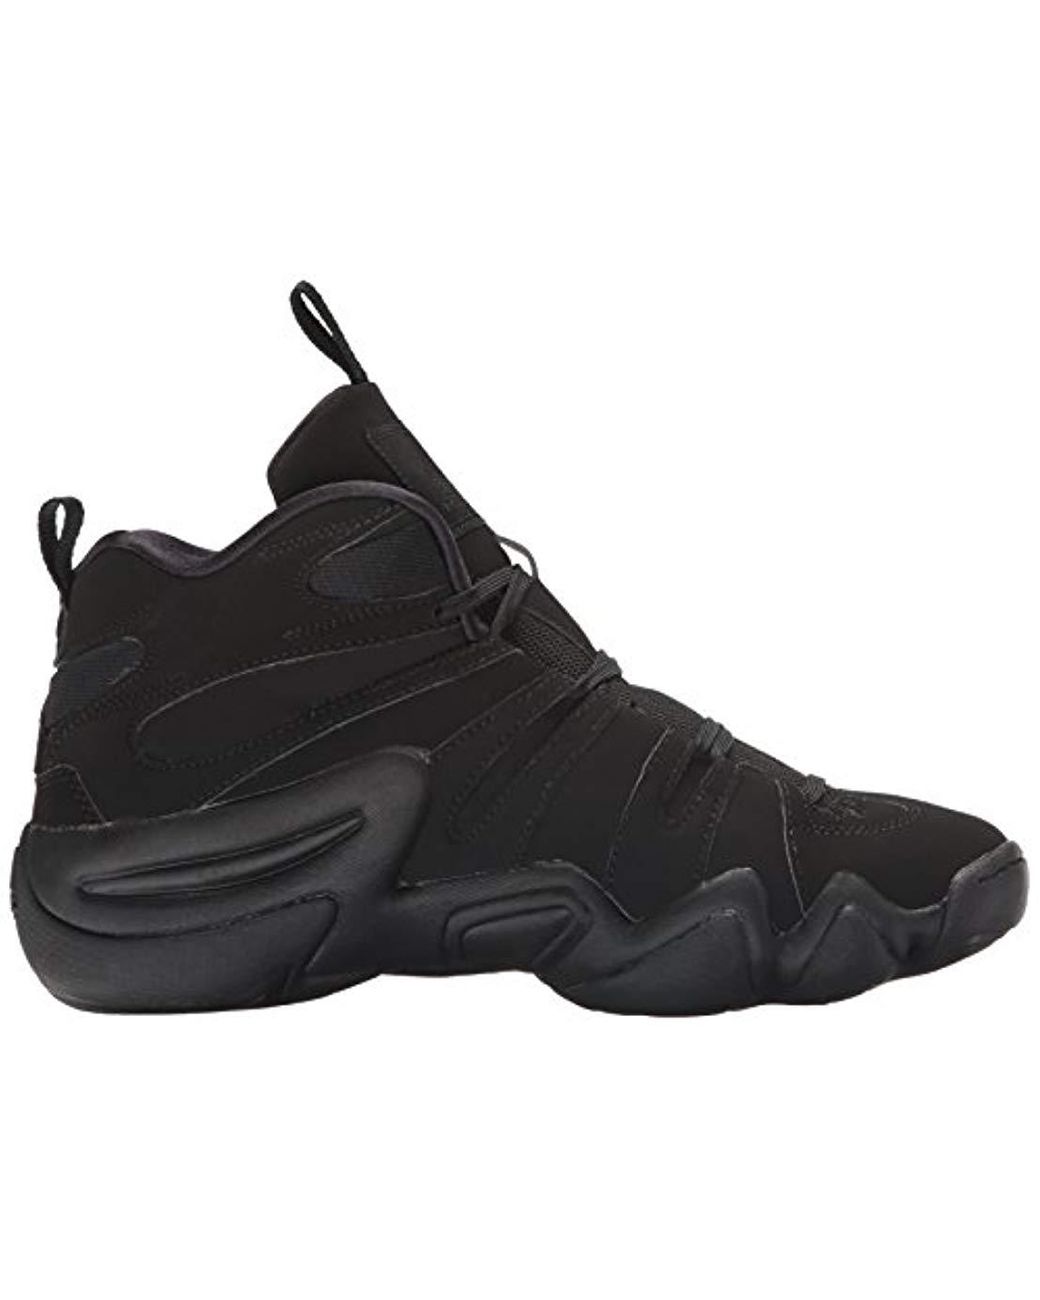 Adidas Performance Crazy 8 Basketball Shoe In Black For Men | Lyst